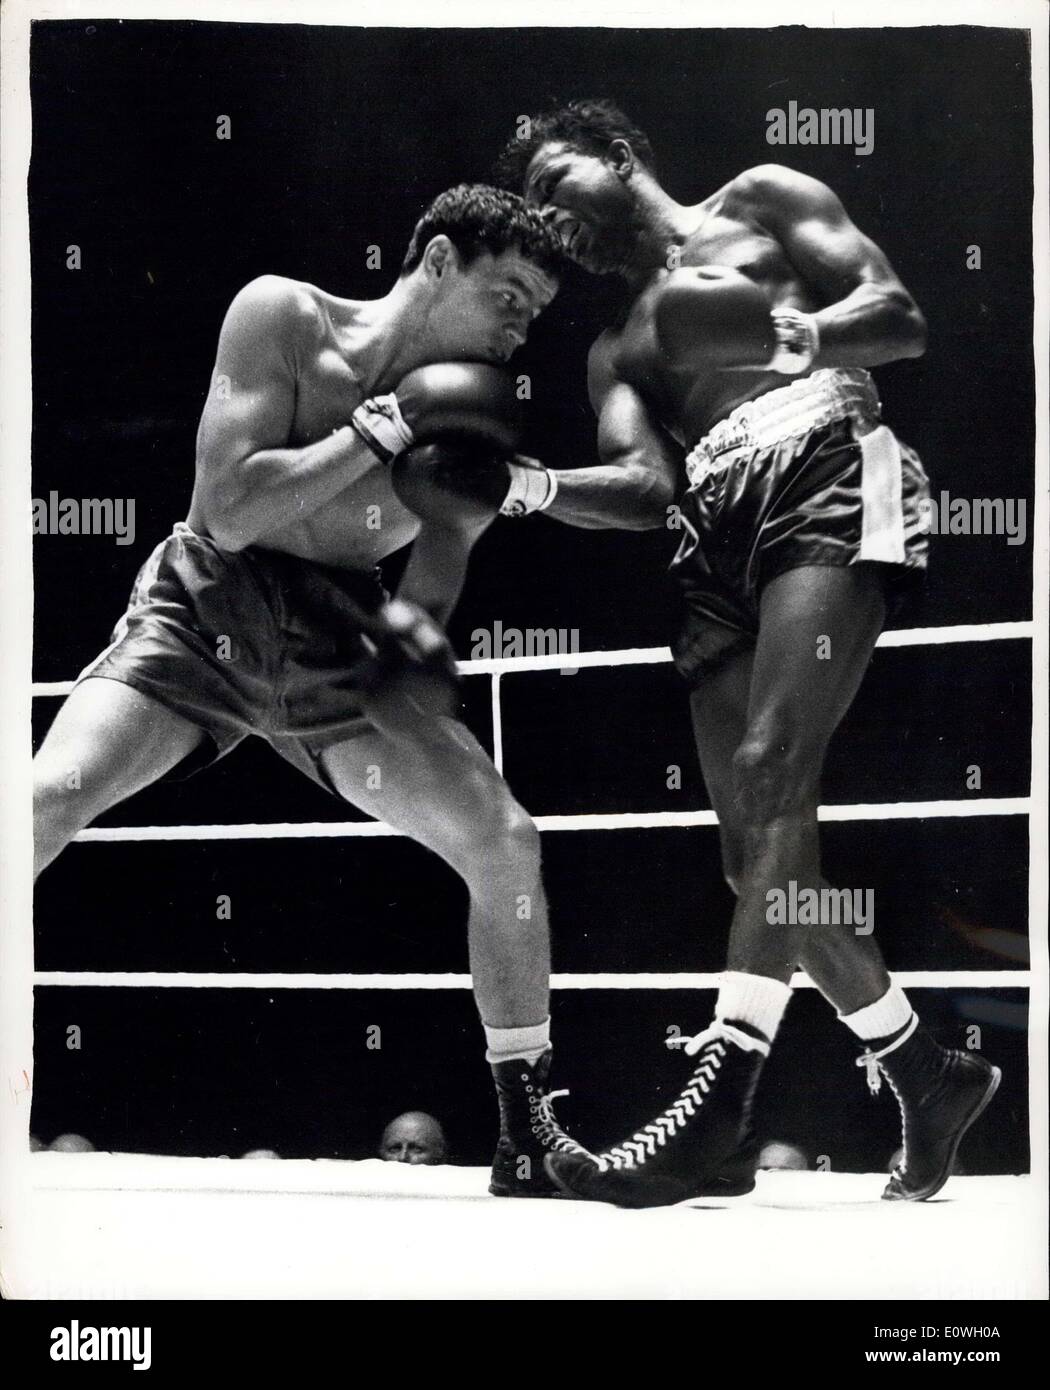 Sep. 26, 1962 - Downes-Robinson Fight at Wembley: Britain's Terry Downes  outpointed Sugar Ray Robinson over ten rounds sat the Empire Pool in  Wembley last night. Photo shows Downes, British middleweight champion,